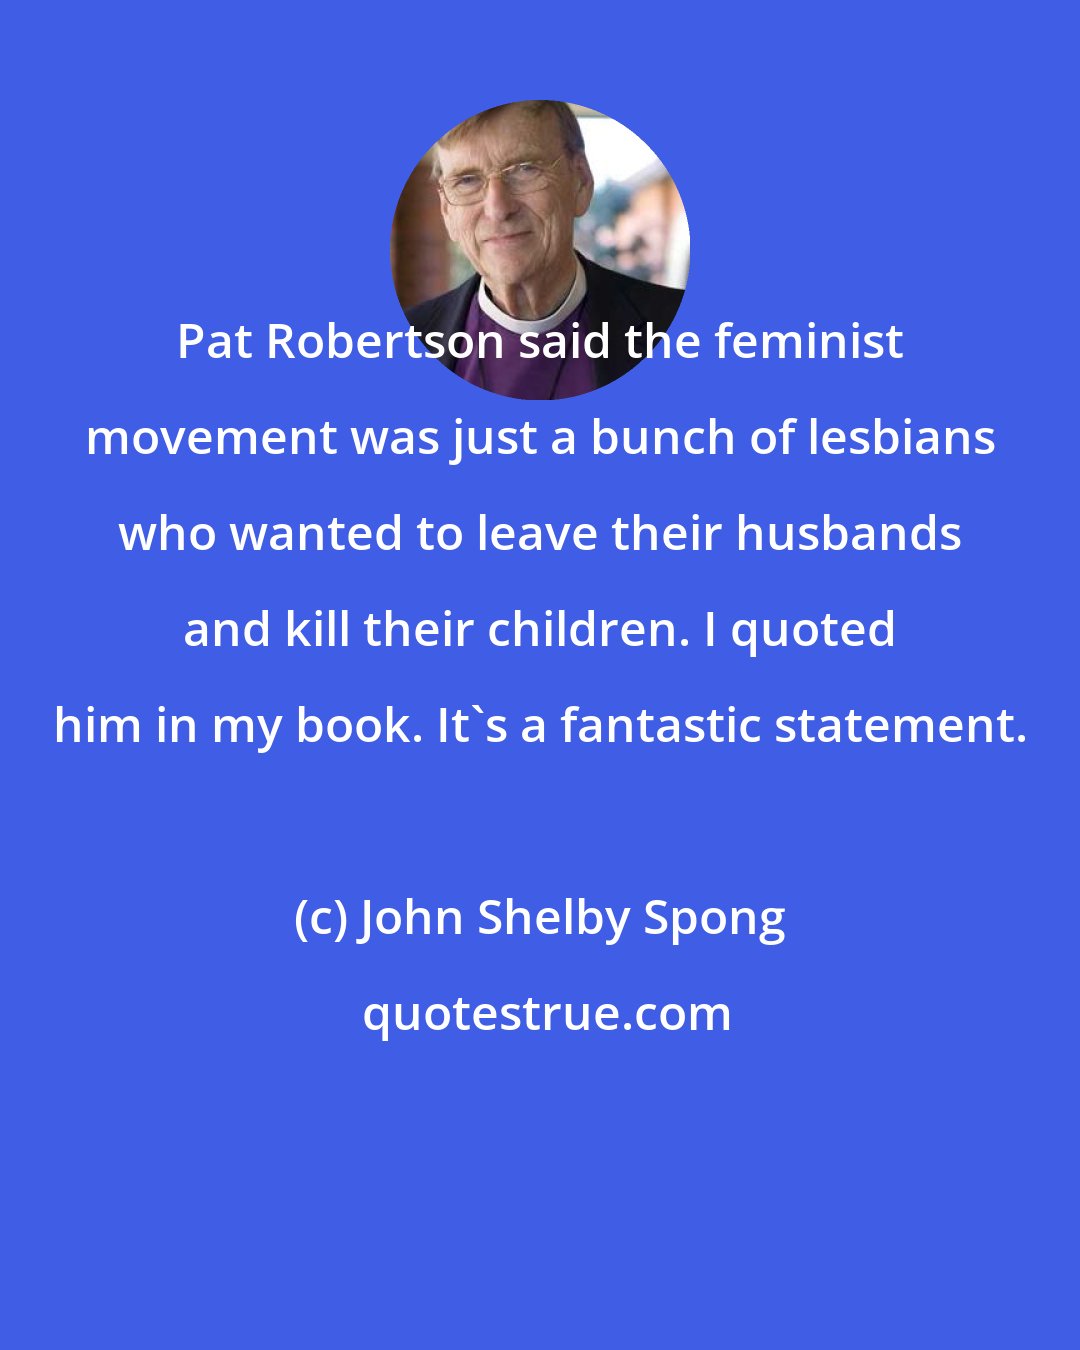 John Shelby Spong: Pat Robertson said the feminist movement was just a bunch of lesbians who wanted to leave their husbands and kill their children. I quoted him in my book. It's a fantastic statement.